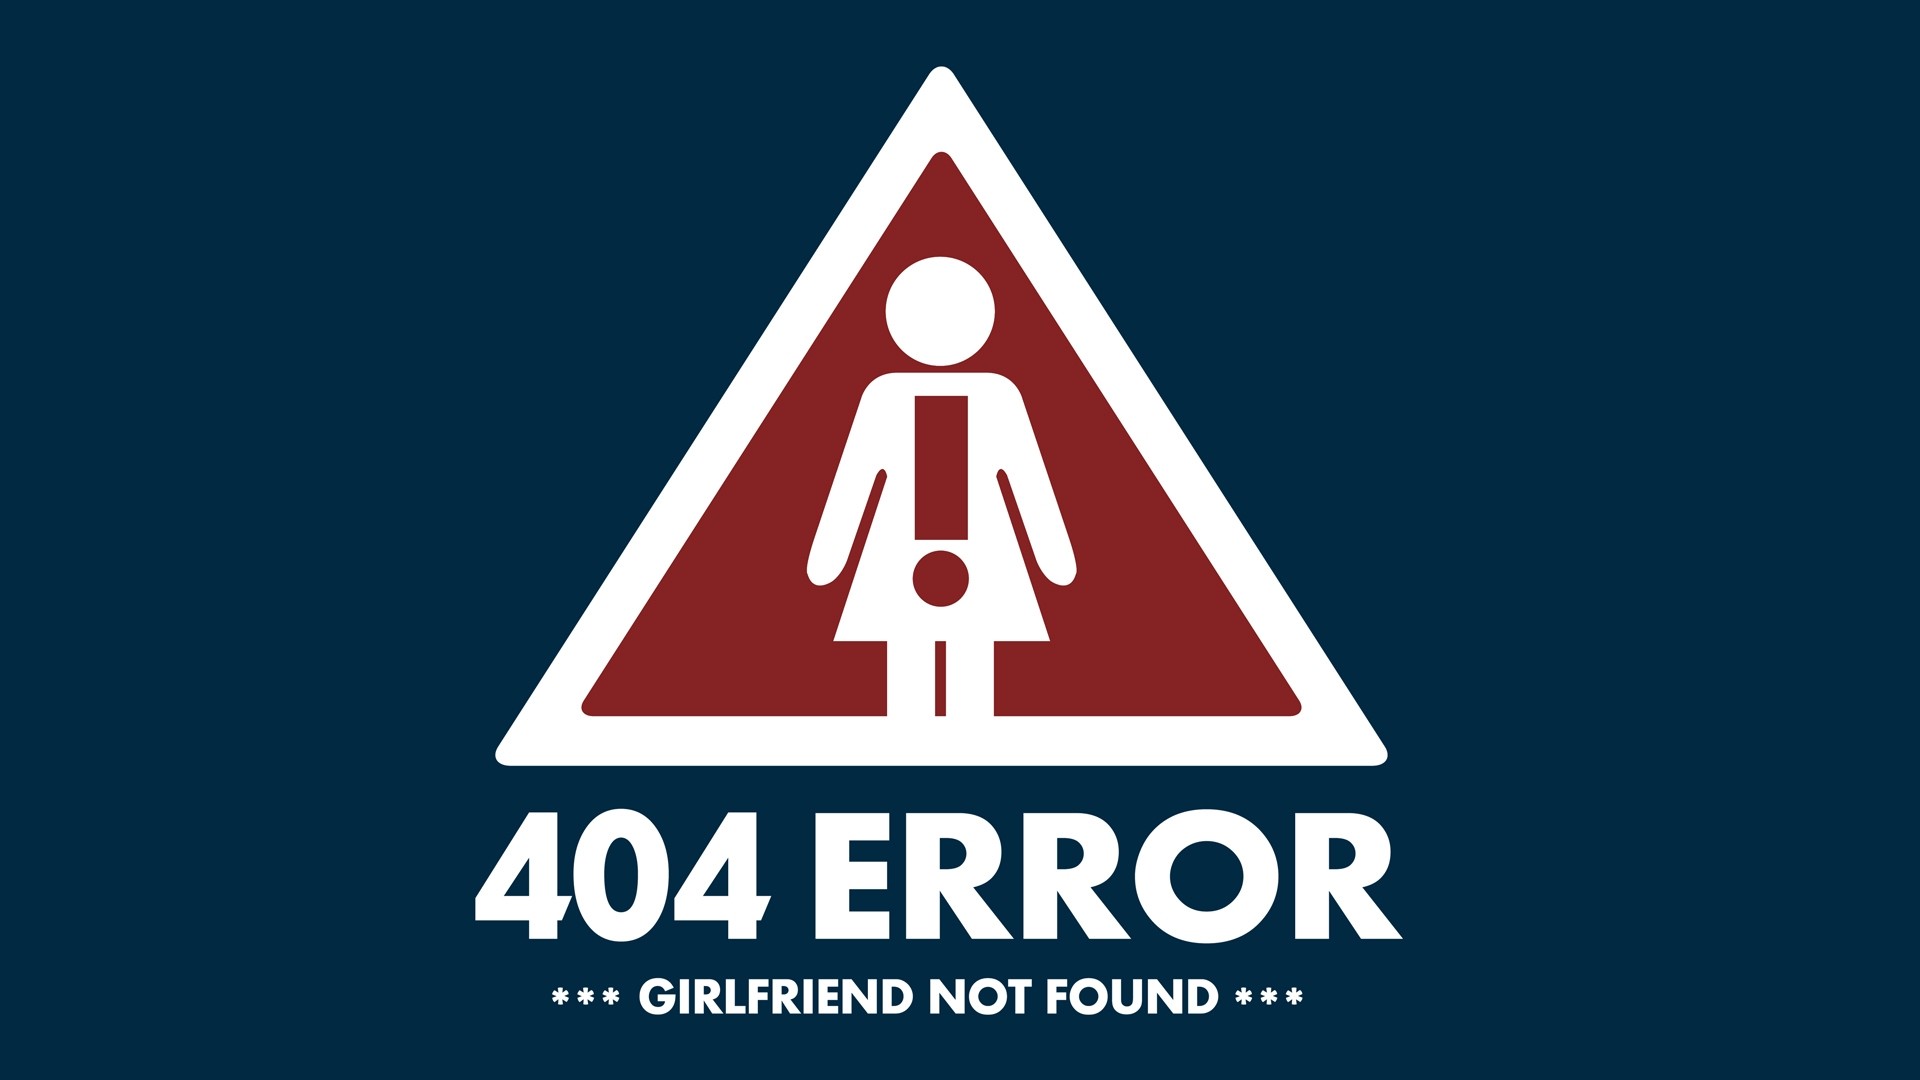 General 1920x1080 Windows Errors 404 Not Found simple background blue background humor triangle sign typography artwork